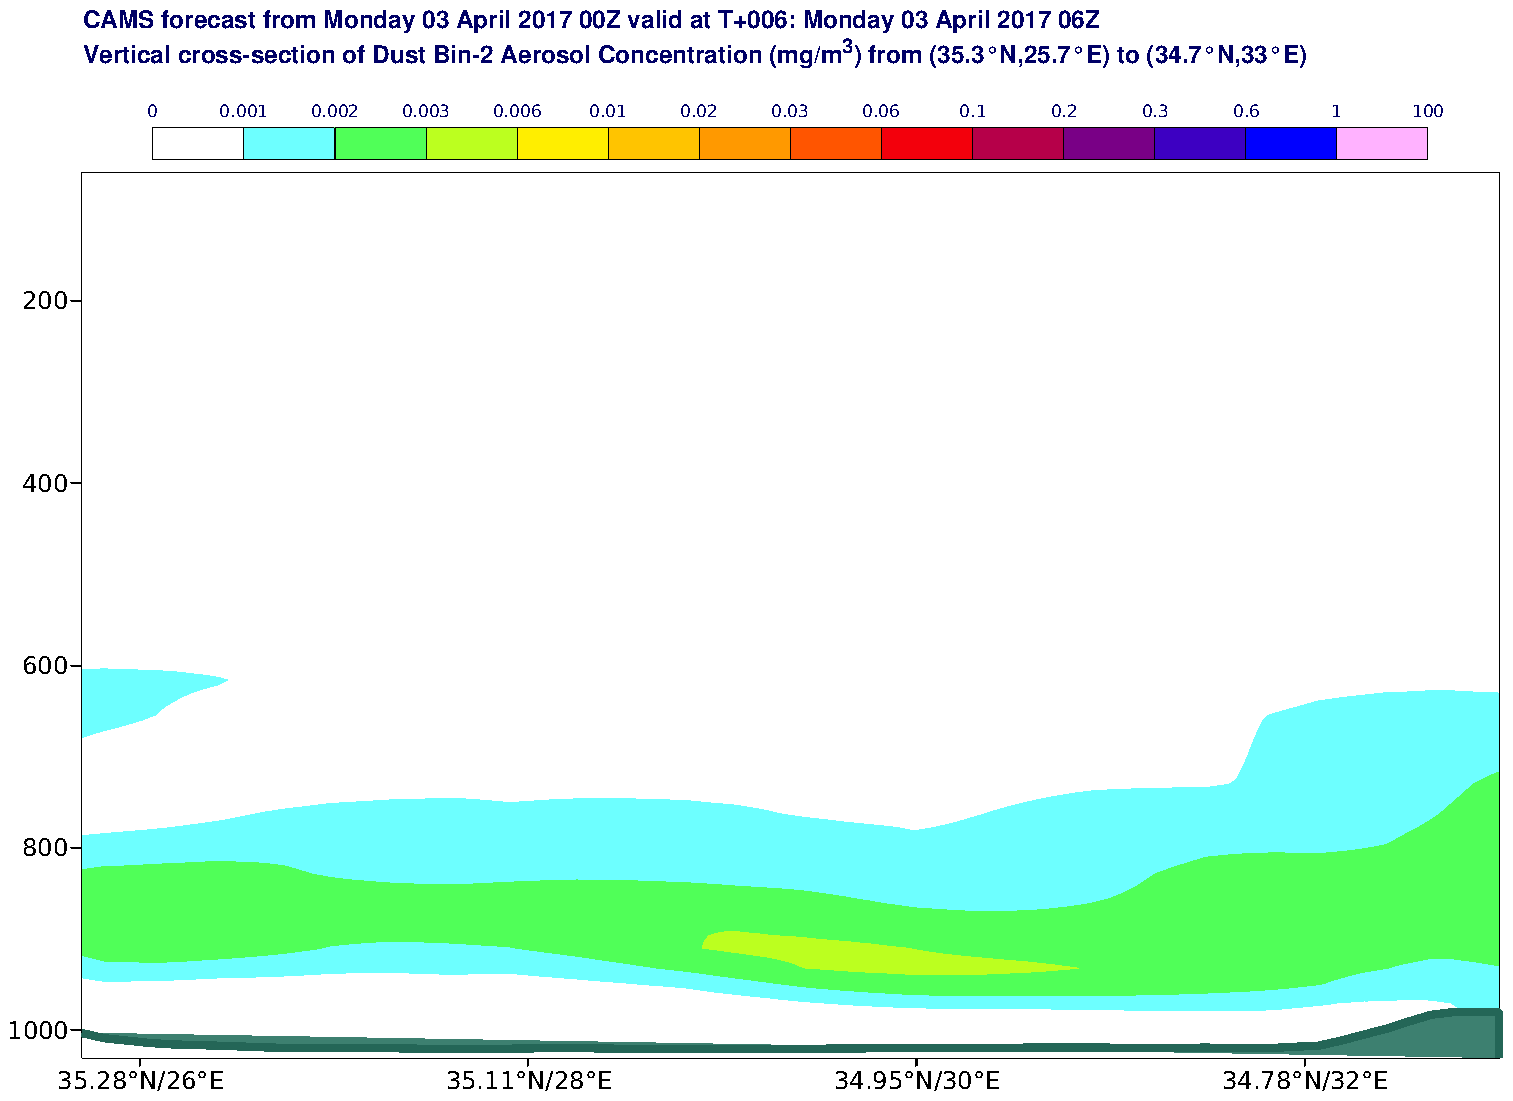 Vertical cross-section of Dust Bin-2 Aerosol Concentration (mg/m3) valid at T6 - 2017-04-03 06:00